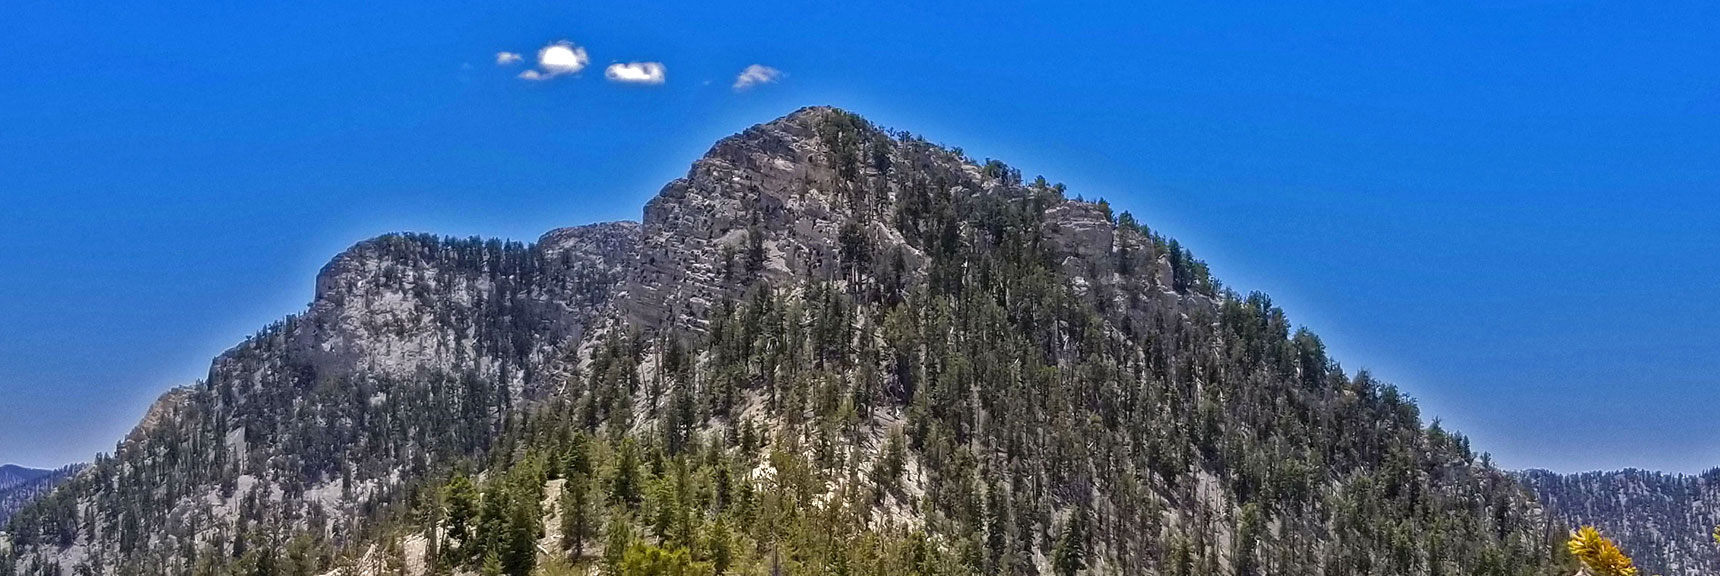 North Side of Sisters North Peak. Potential Summit Approaches Up Middle (North Side) and on Right (West Side) | Black Rock Sister | Mt Charleston Wilderness | Lee Canyon | Spring Mountains, Nevada